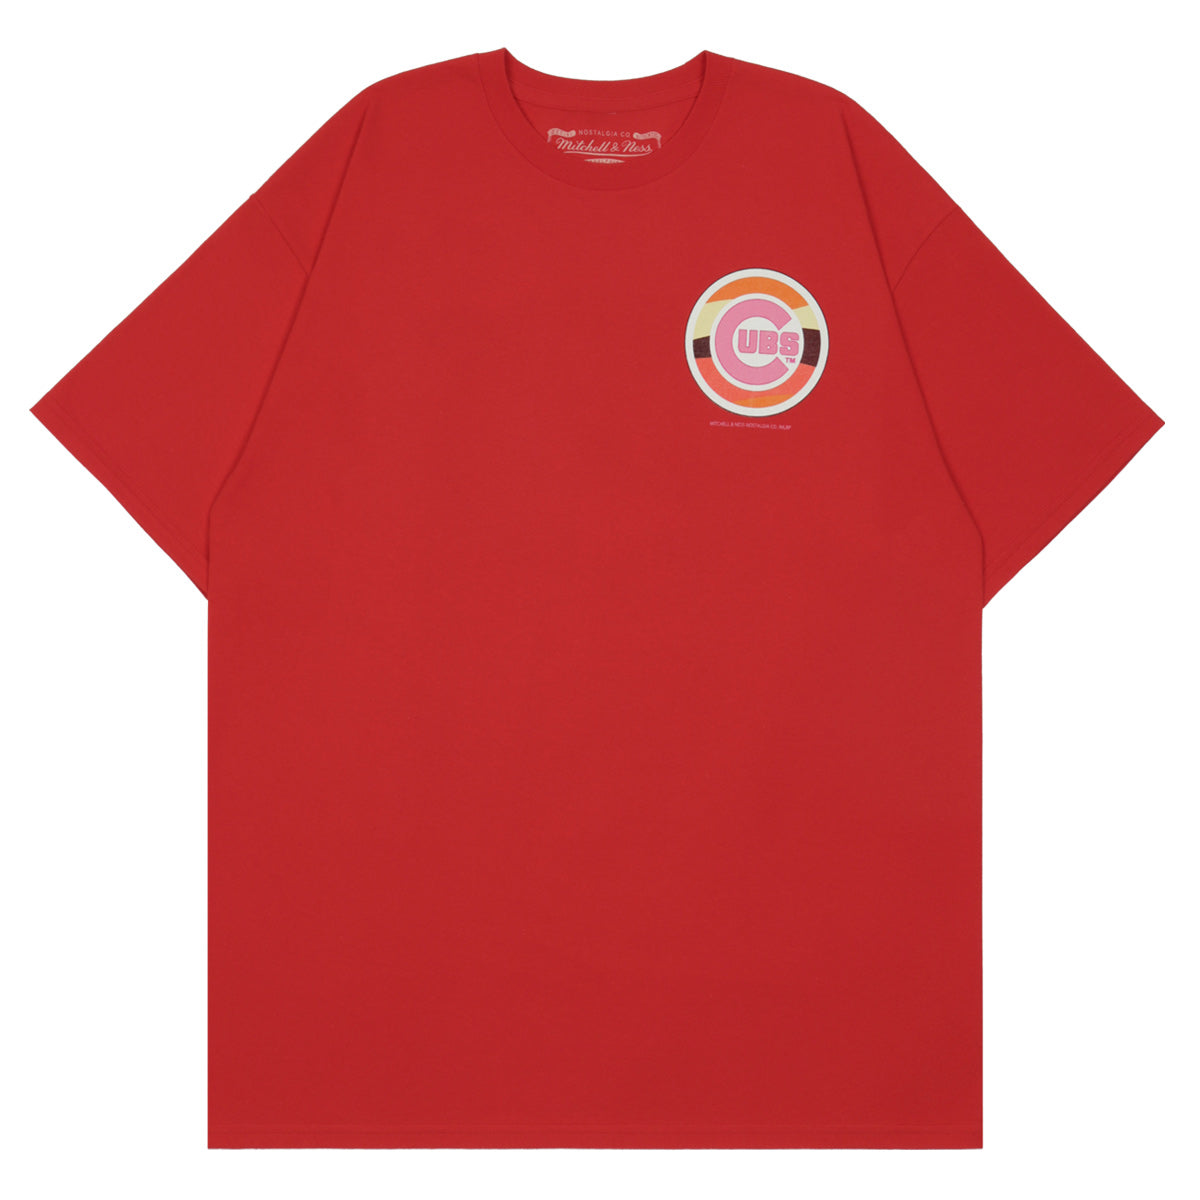 Takashi Murakami × ComplexCon Chicago Cubs S / S Tee RED T-shirt